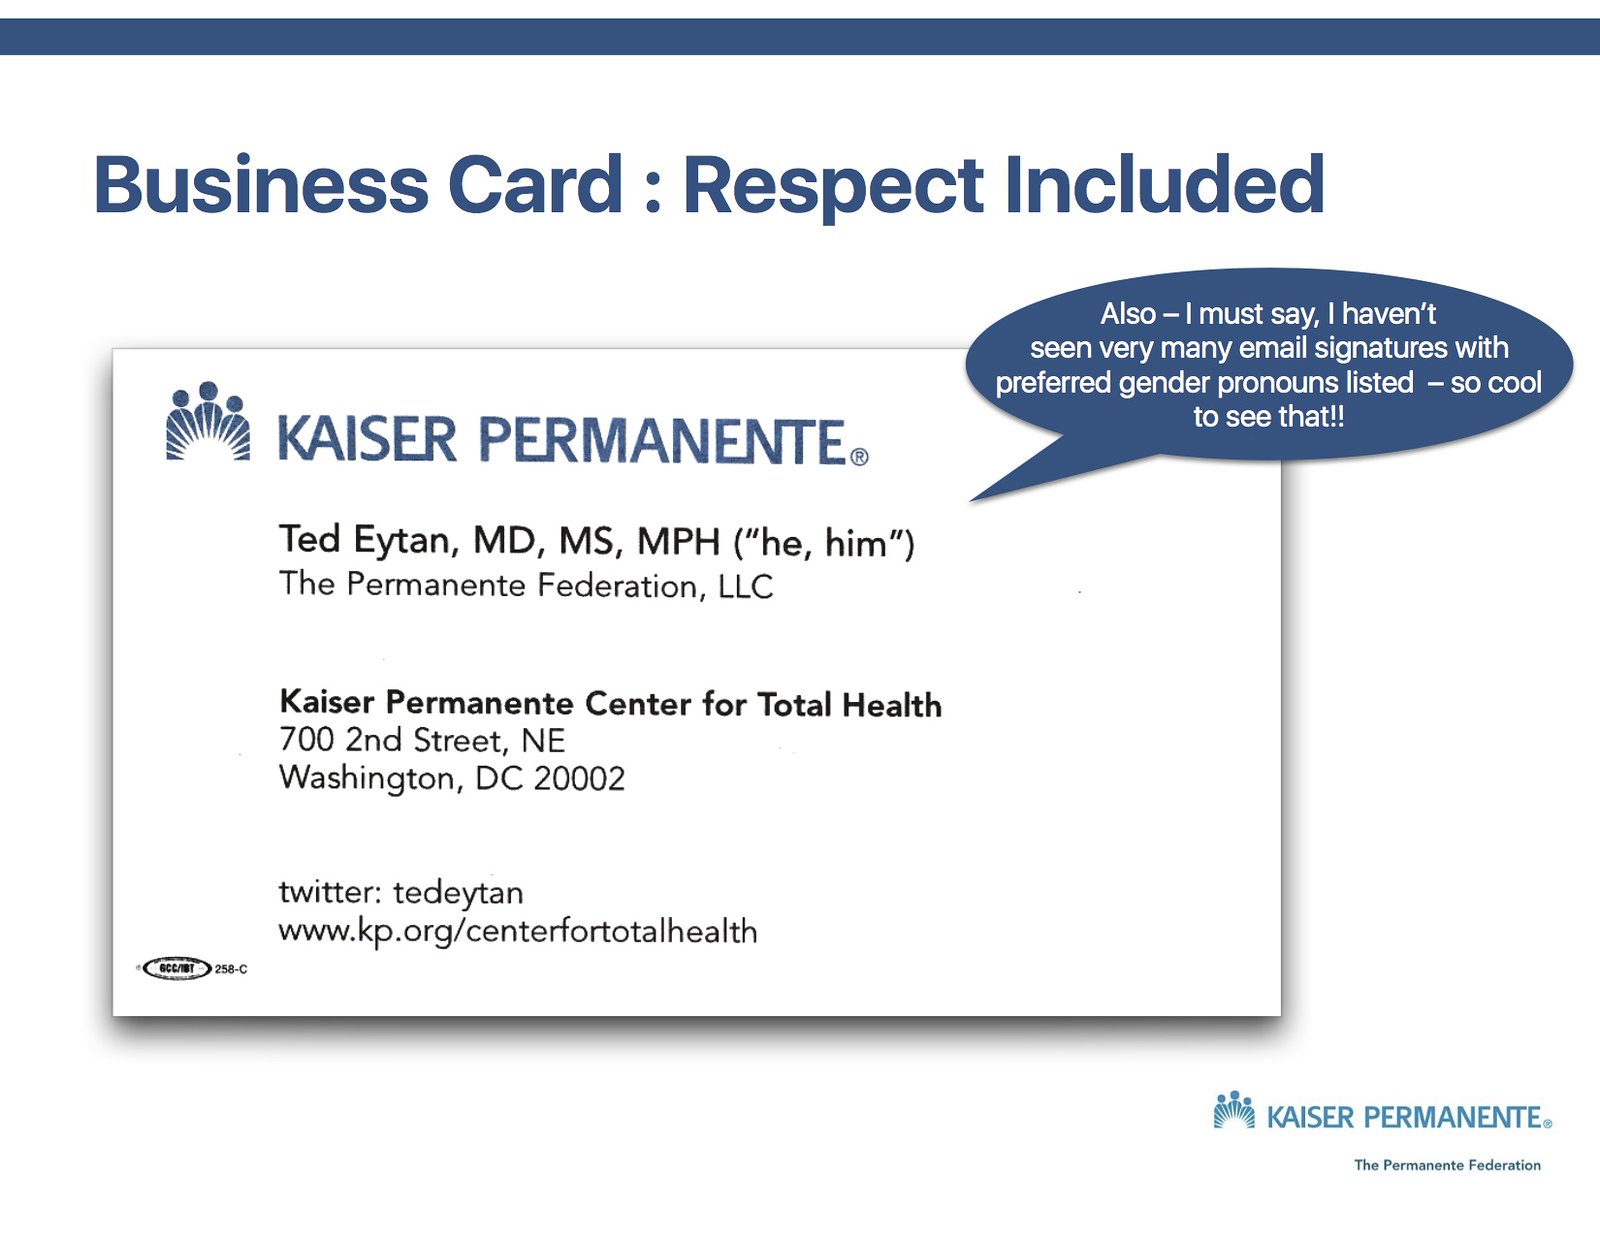 Ted Eytan MD Business Card with Pronouns